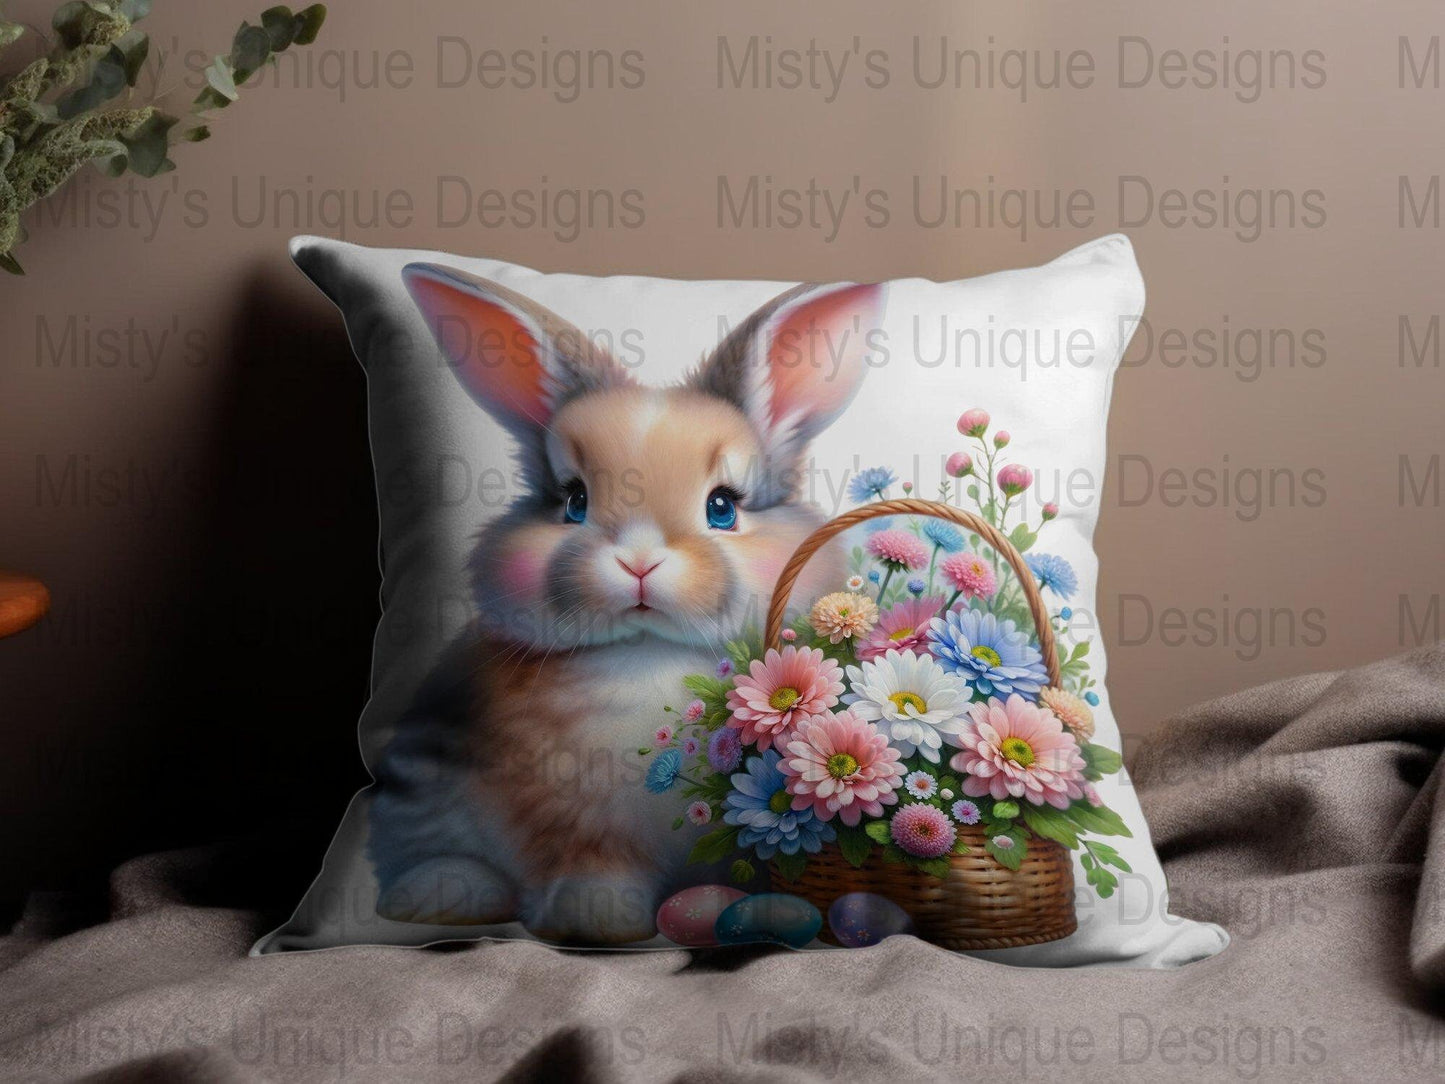 Easter Bunny Clipart, Cute Rabbit with Basket and Flowers, Spring Season Digital Download, Perfect for Crafting and Decor, PNG File